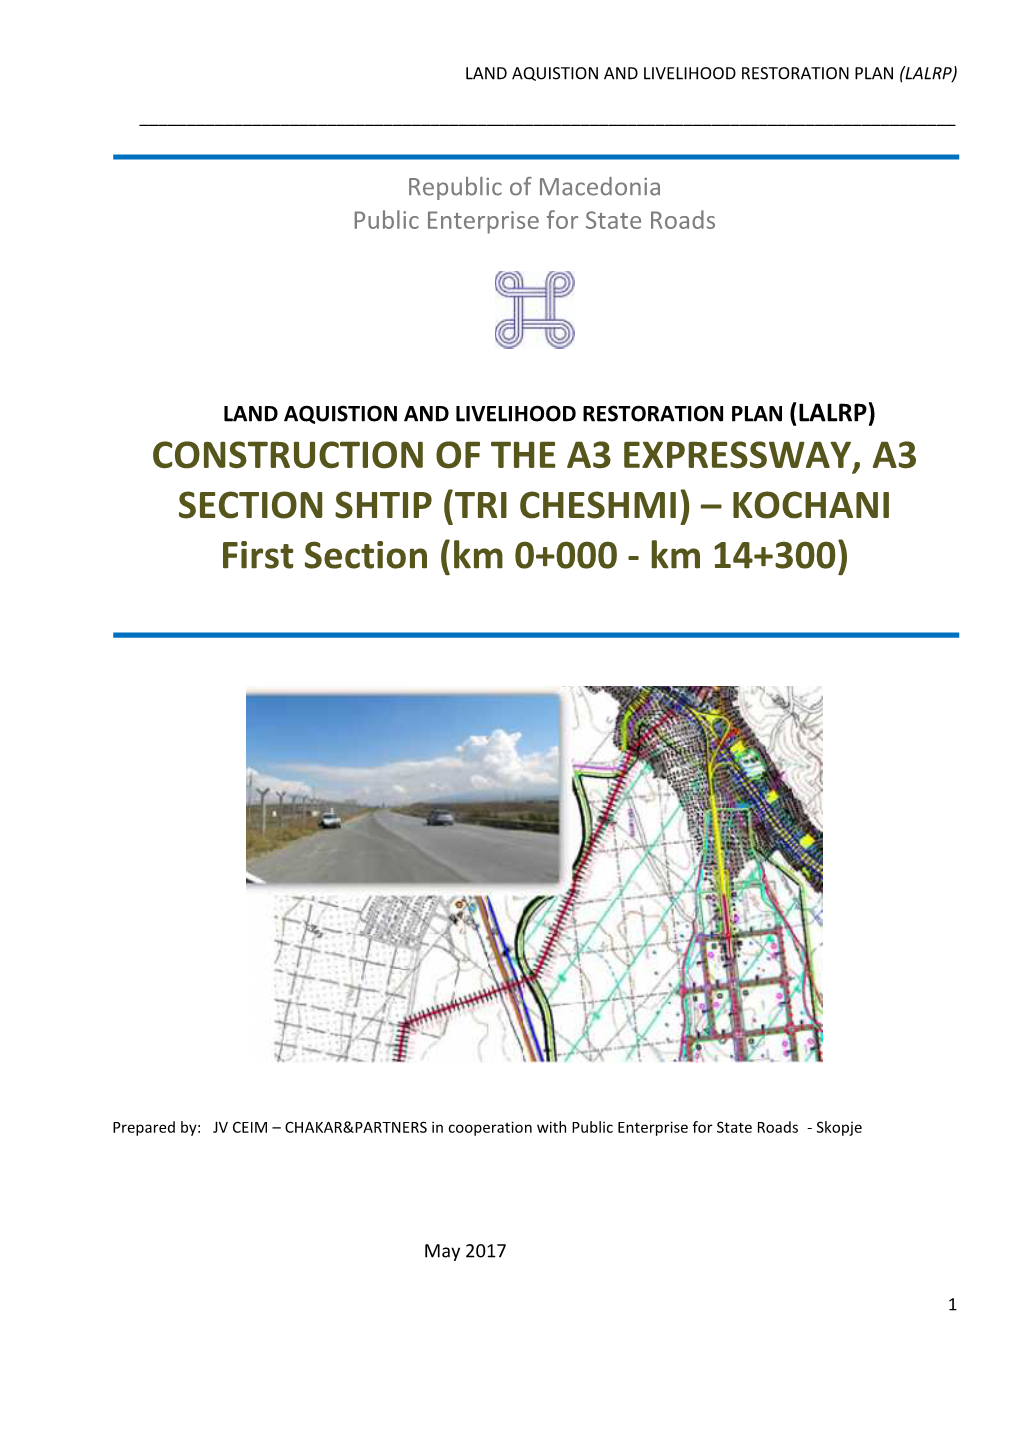 CONSTRUCTION of the A3 EXPRESSWAY, A3 SECTION SHTIP (TRI CHESHMI) – KOCHANI First Section (Km 0+000 - Km 14+300)